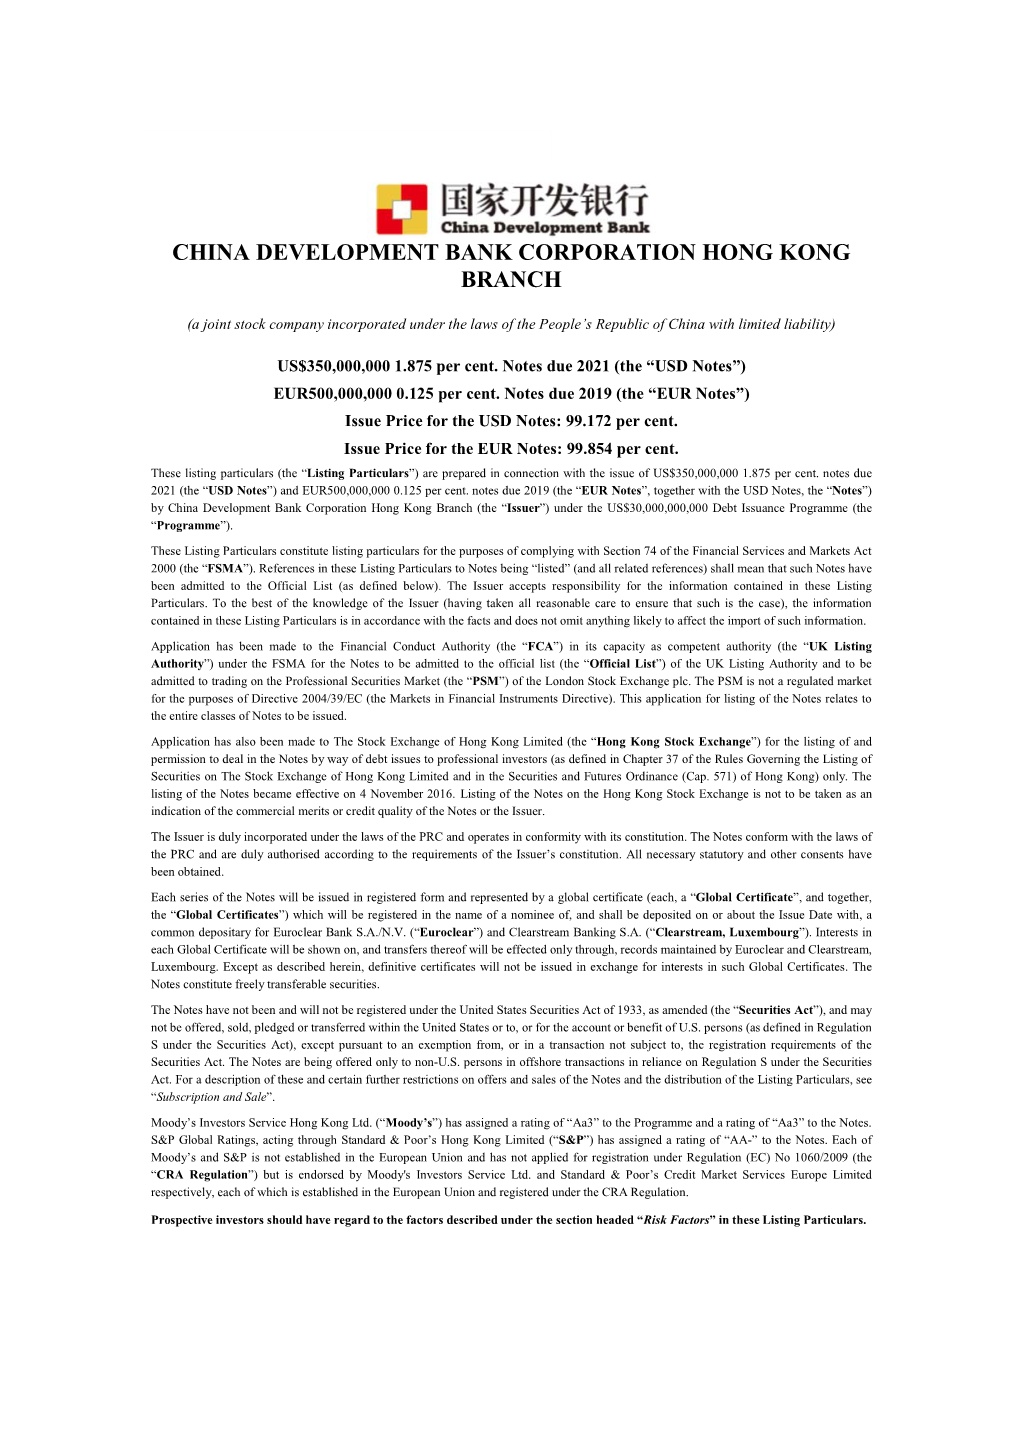 China Development Bank Corporation Hong Kong Branch (The “Issuer”) Under the US$30,000,000,000 Debt Issuance Programme (The “Programme”)